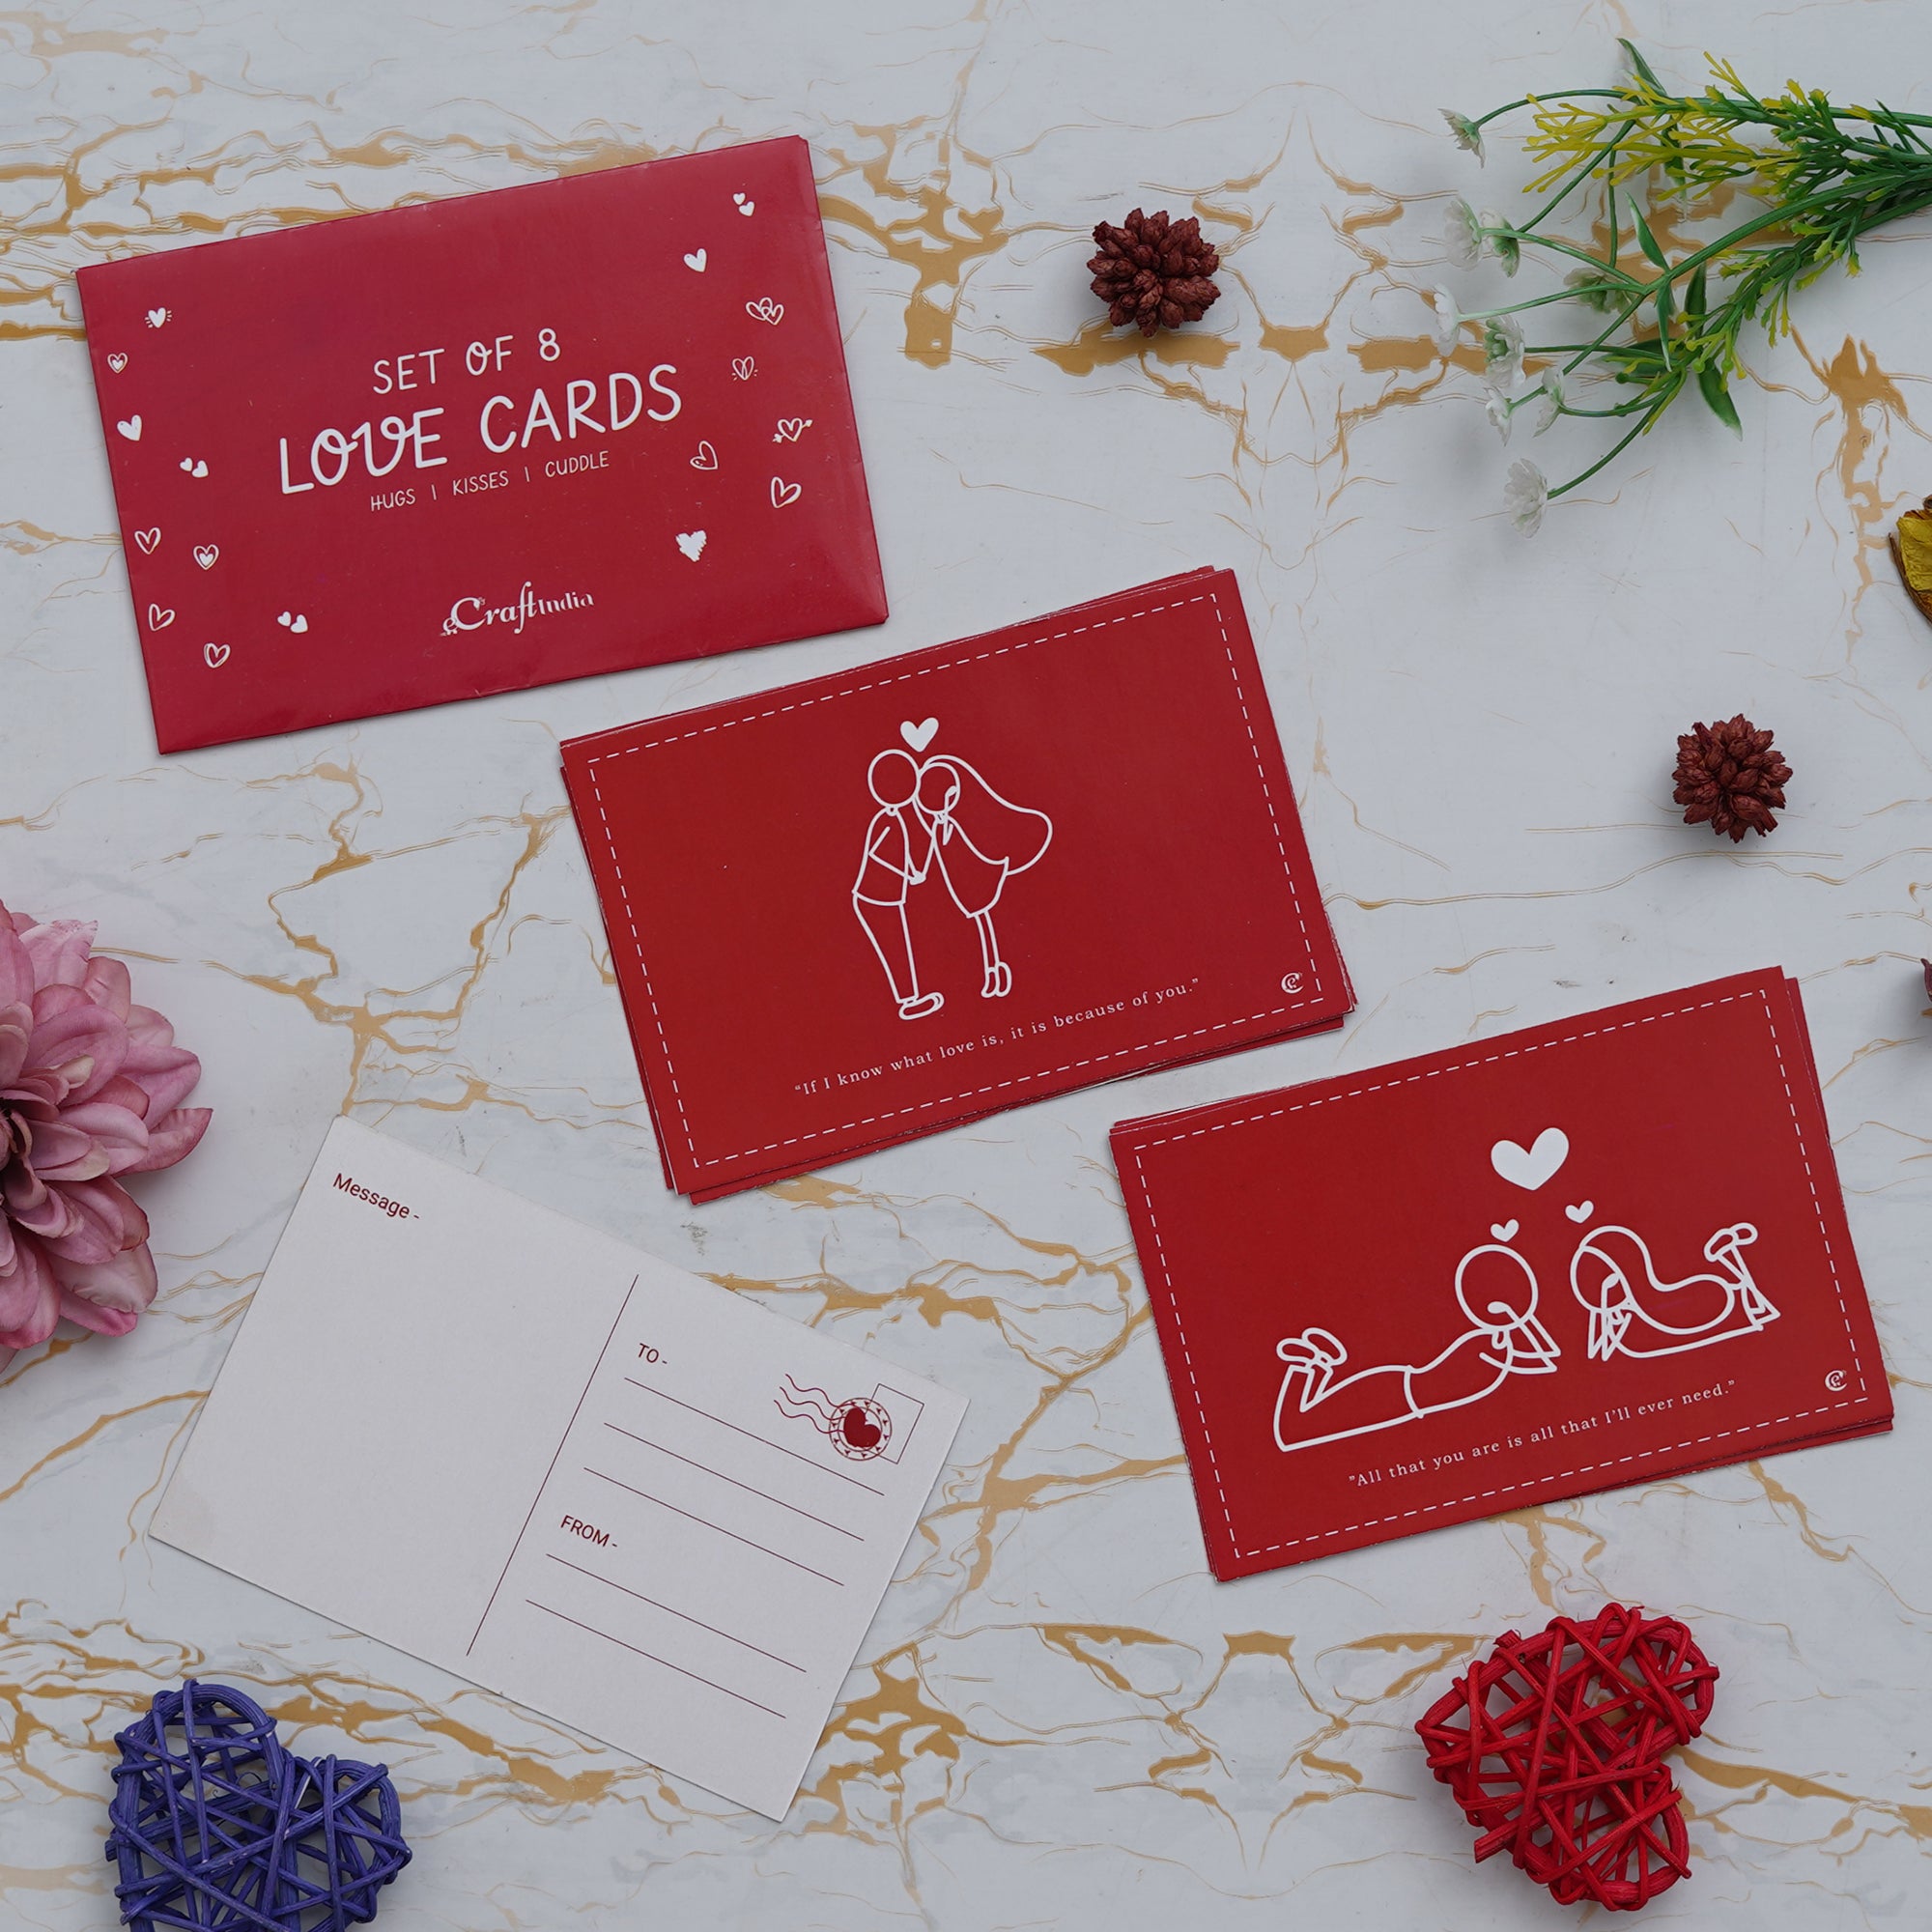 Valentine Combo of Pack of 8 Love Gift Cards, Golden Rose Gift Set, Red and White Heart Hugging Each Other Gift Set 1